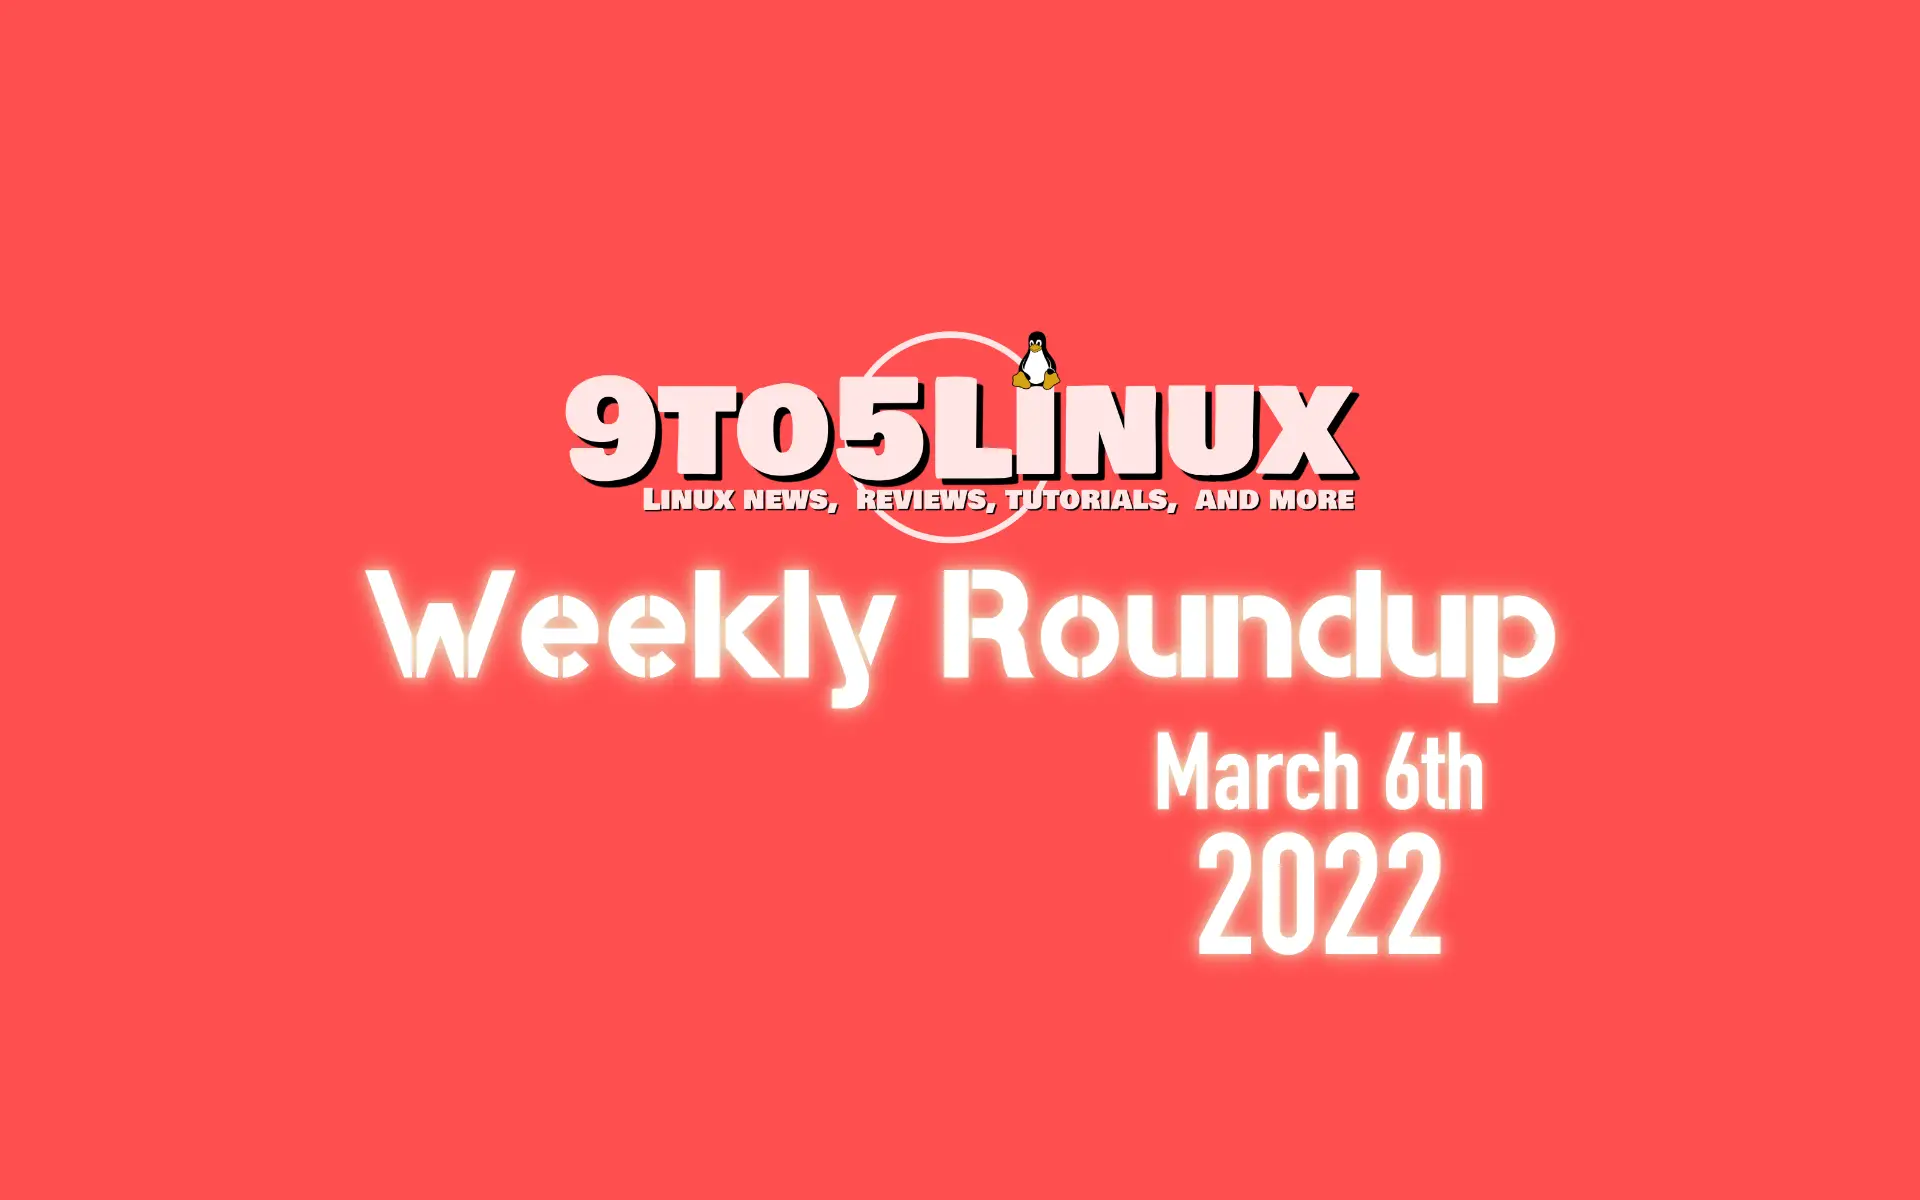 9to5Linux Weekly Roundup: March 6th, 2022